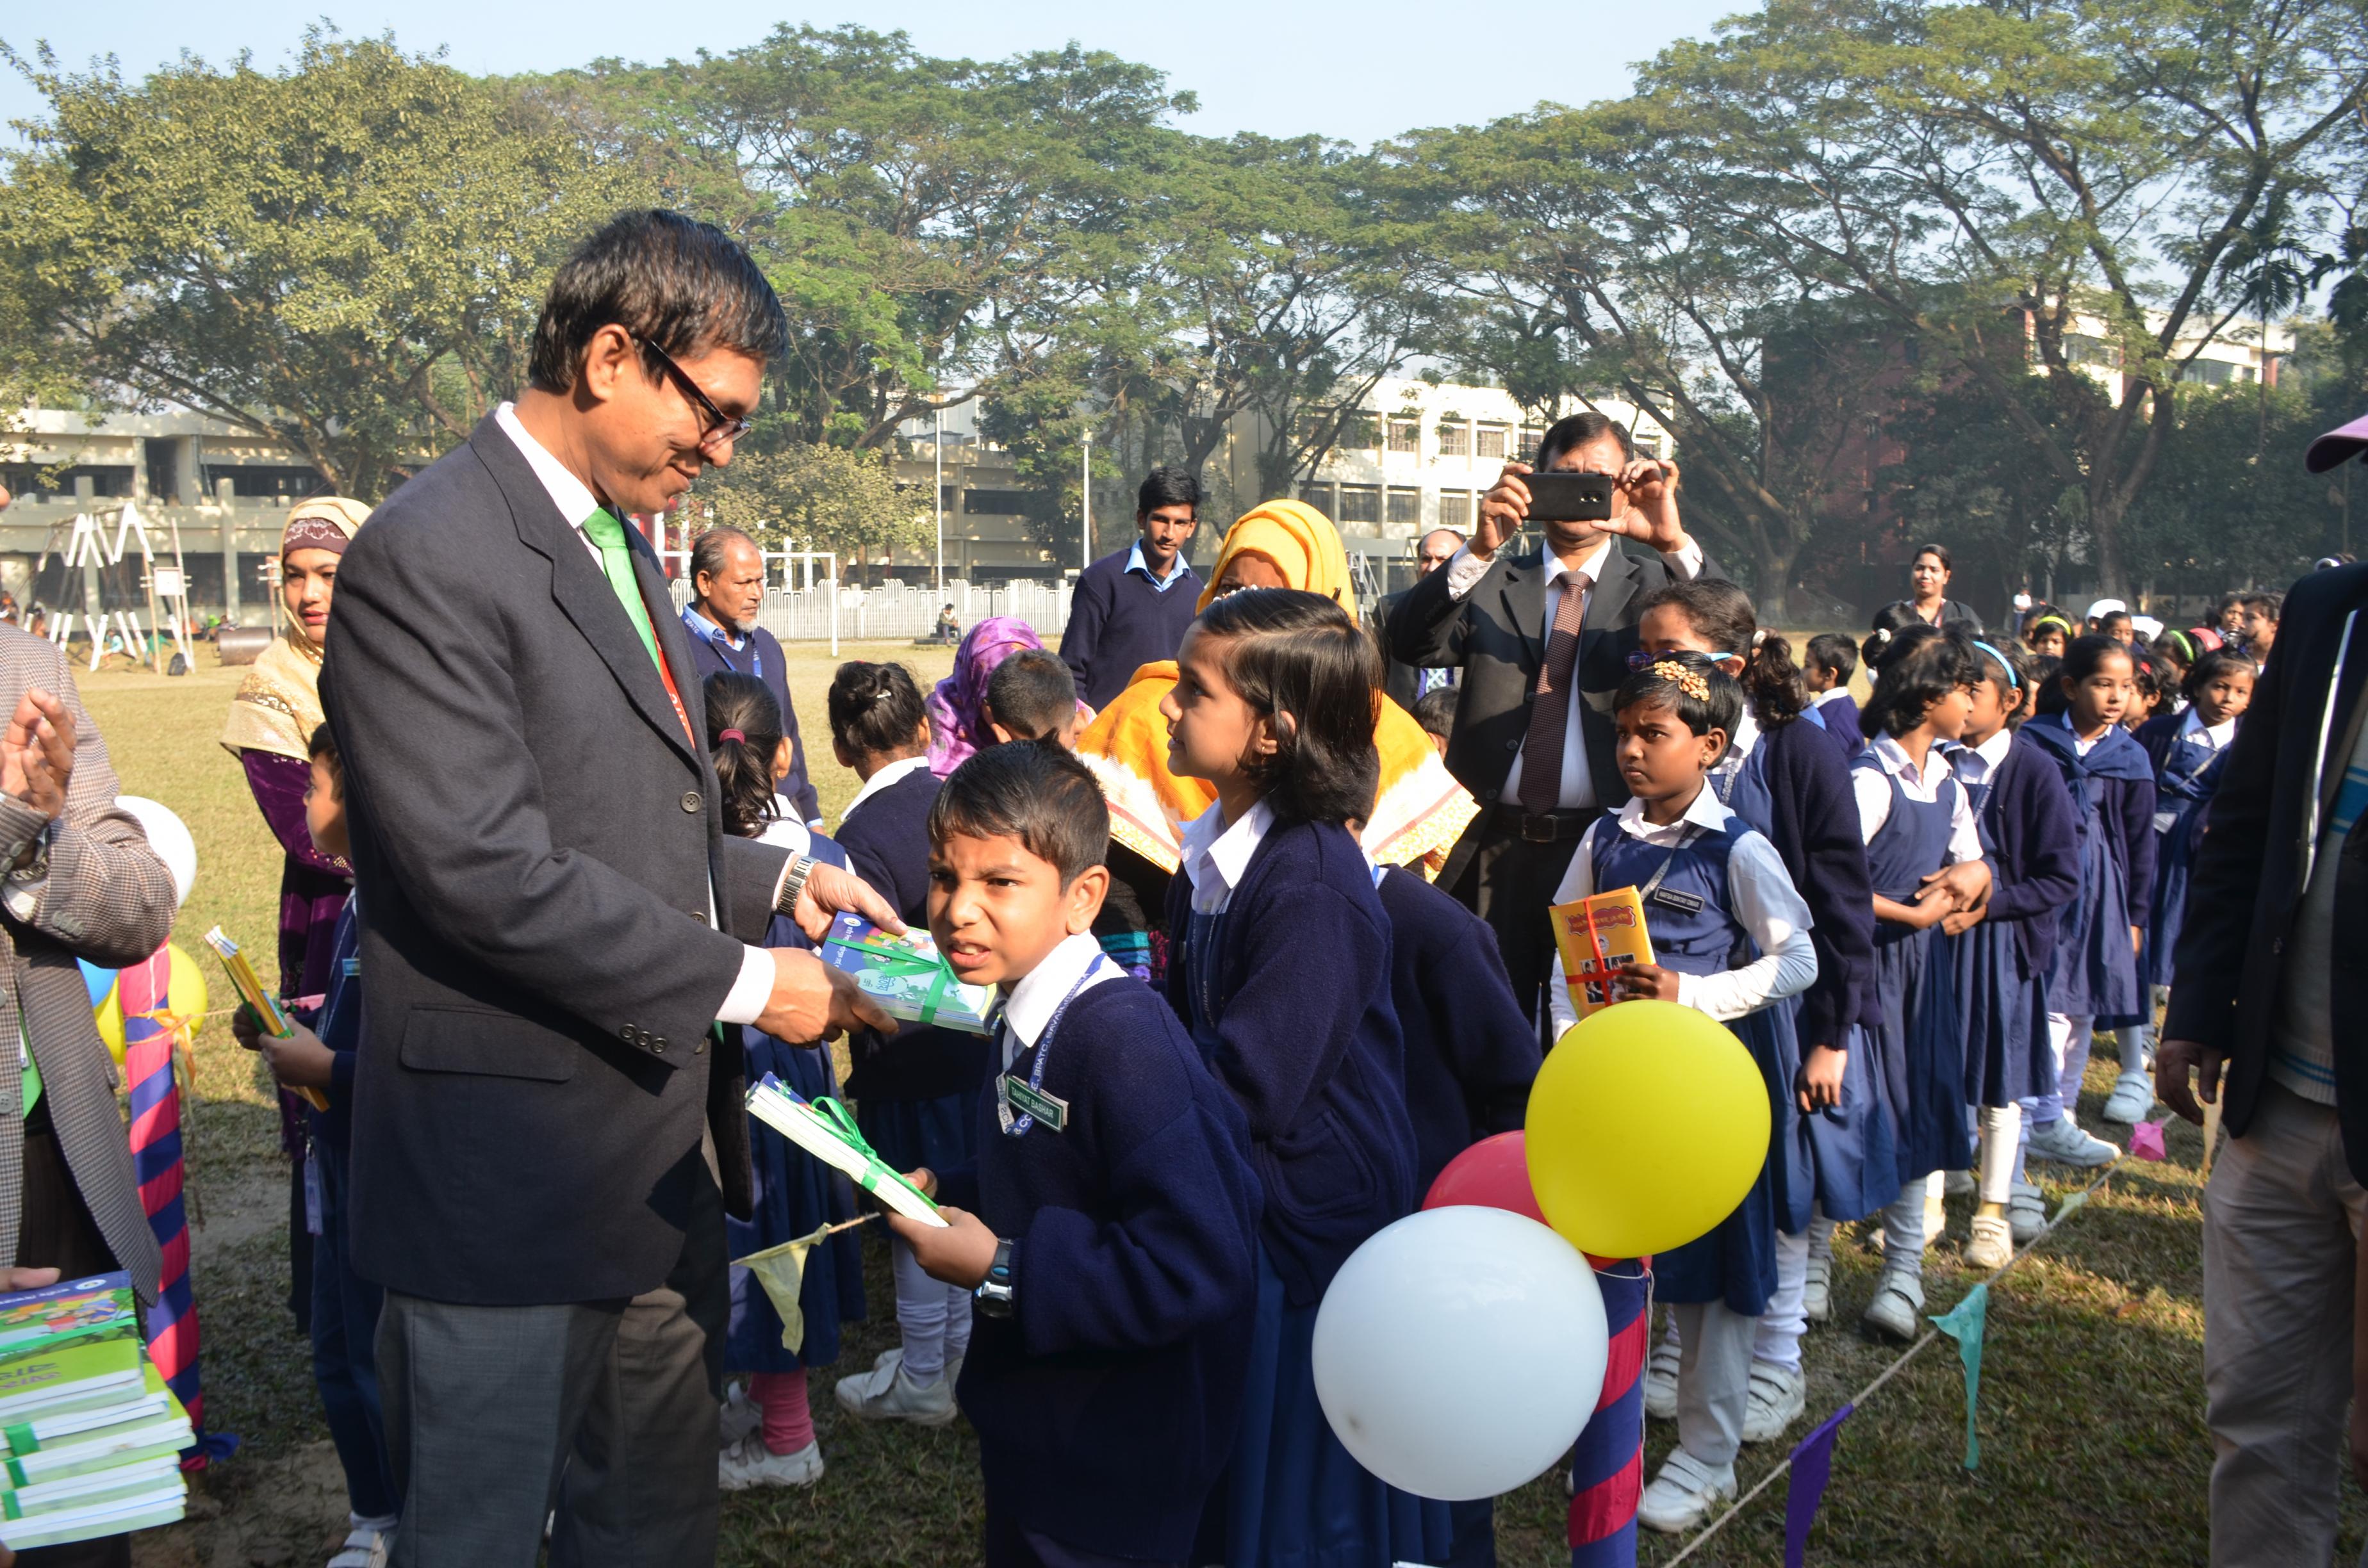 Book Festival in BPATC School and College 2019